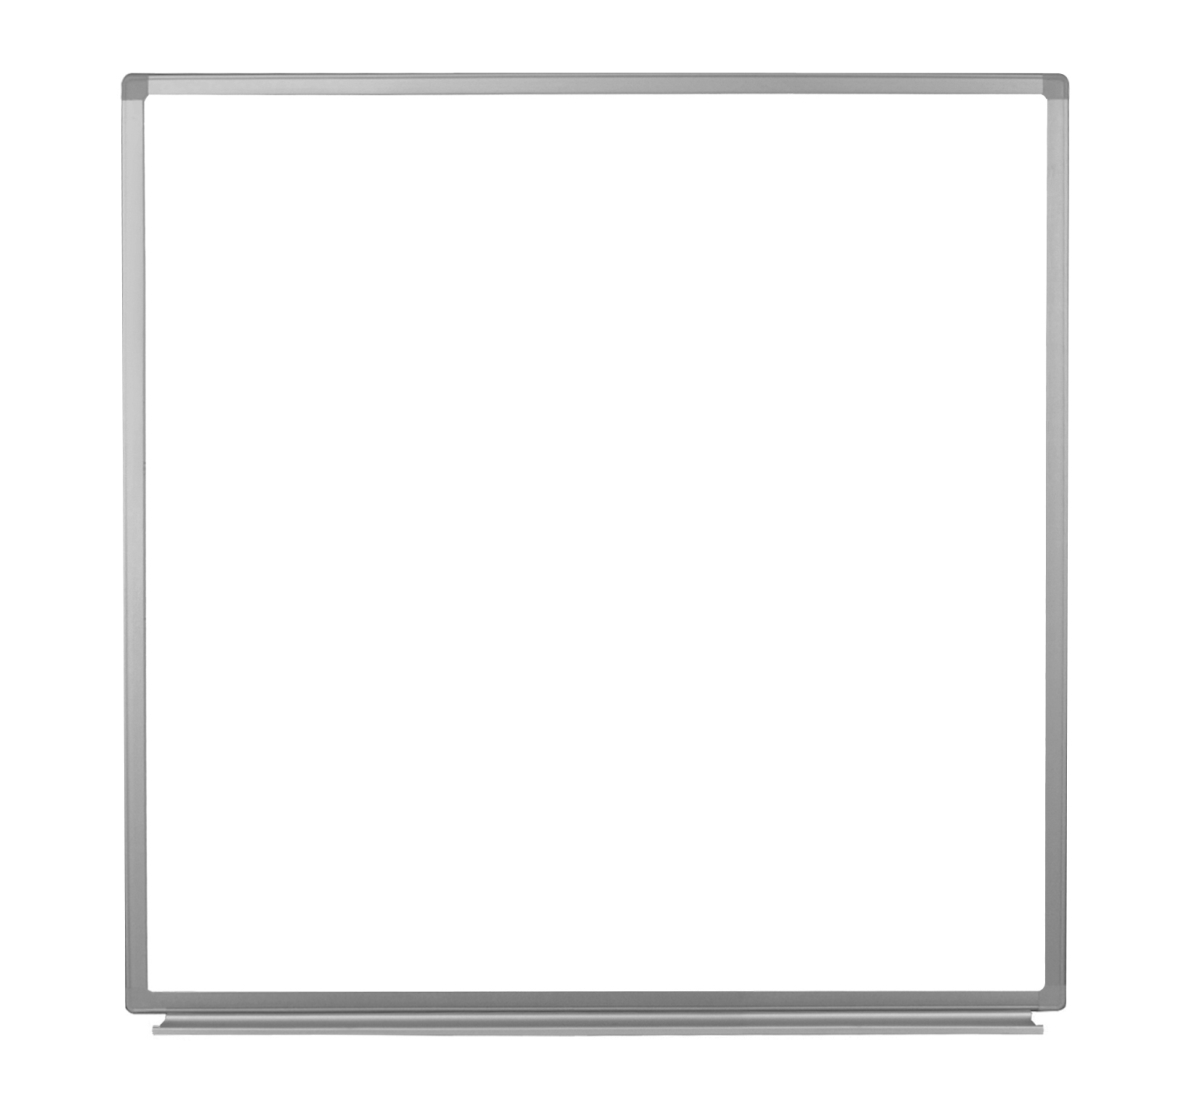 Wb4848w 48 X 48 In. Wall Mounted Magnetic Whiteboard